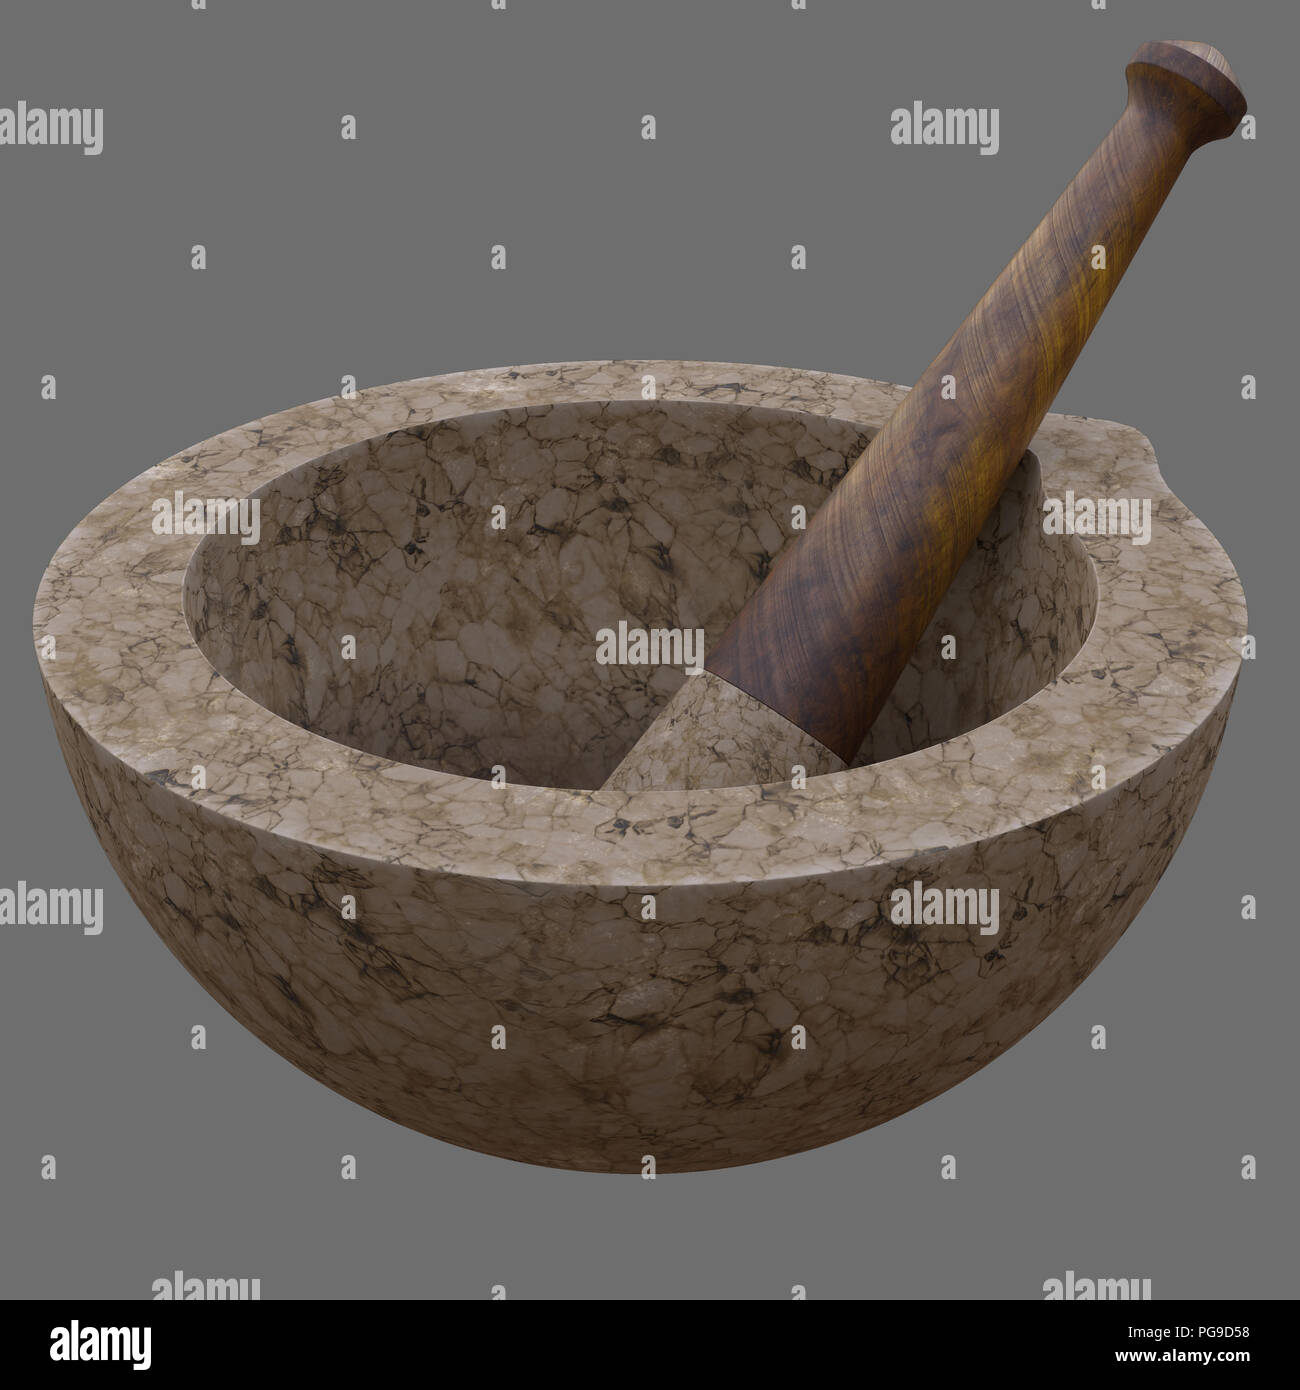 Pestle and Mortar for Alchemy Experiments or Cookery Stock Photo